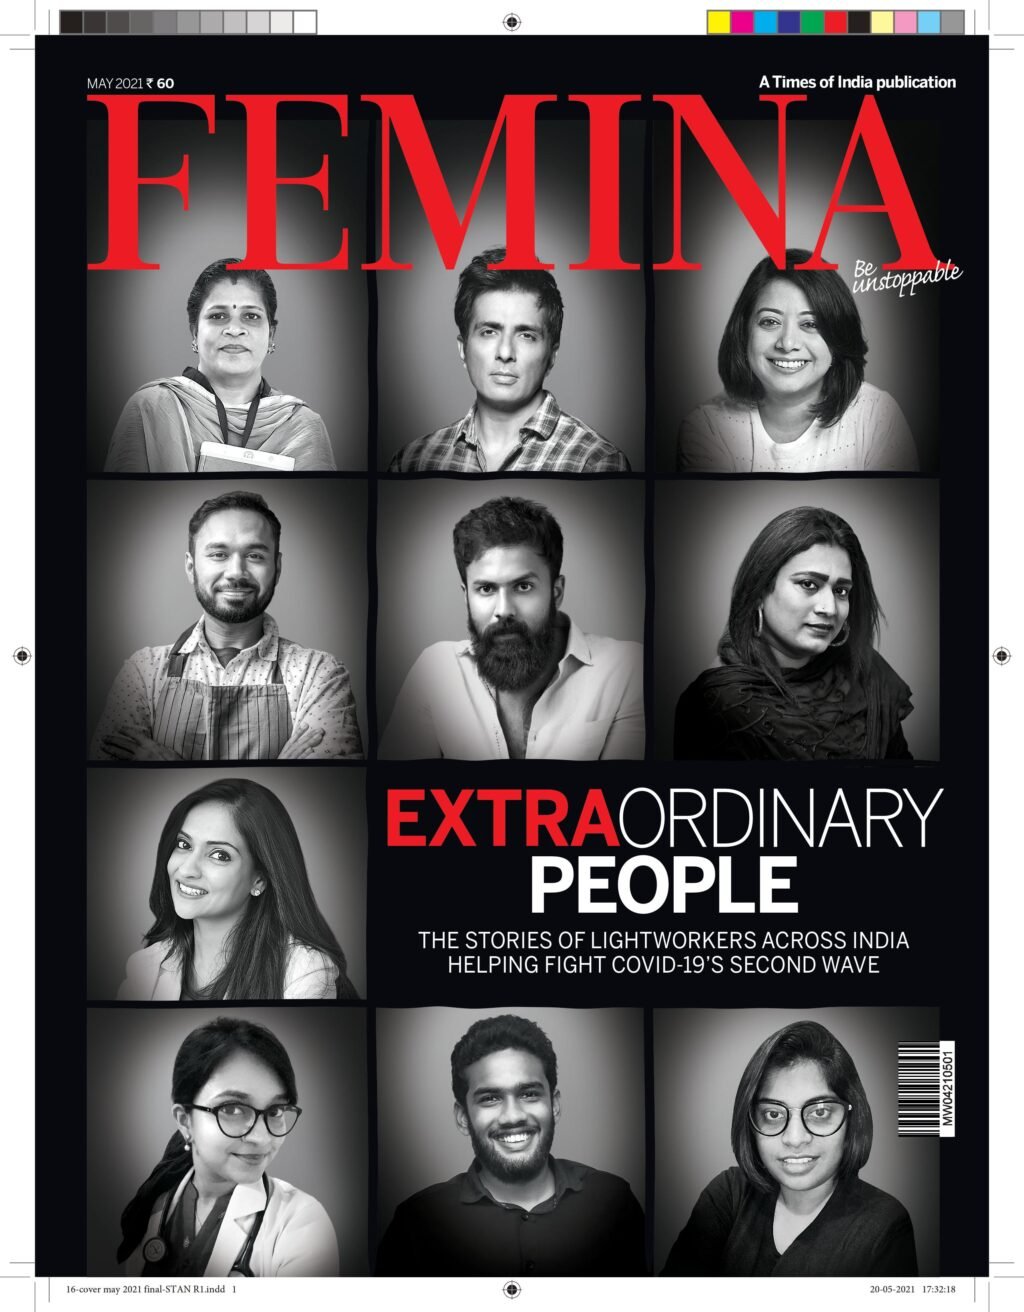 ‘’We are in this together,’’ say the 10 role models on Femina’s cover, who helped pandemic-affected citizens, in the magazine’s latest Edition